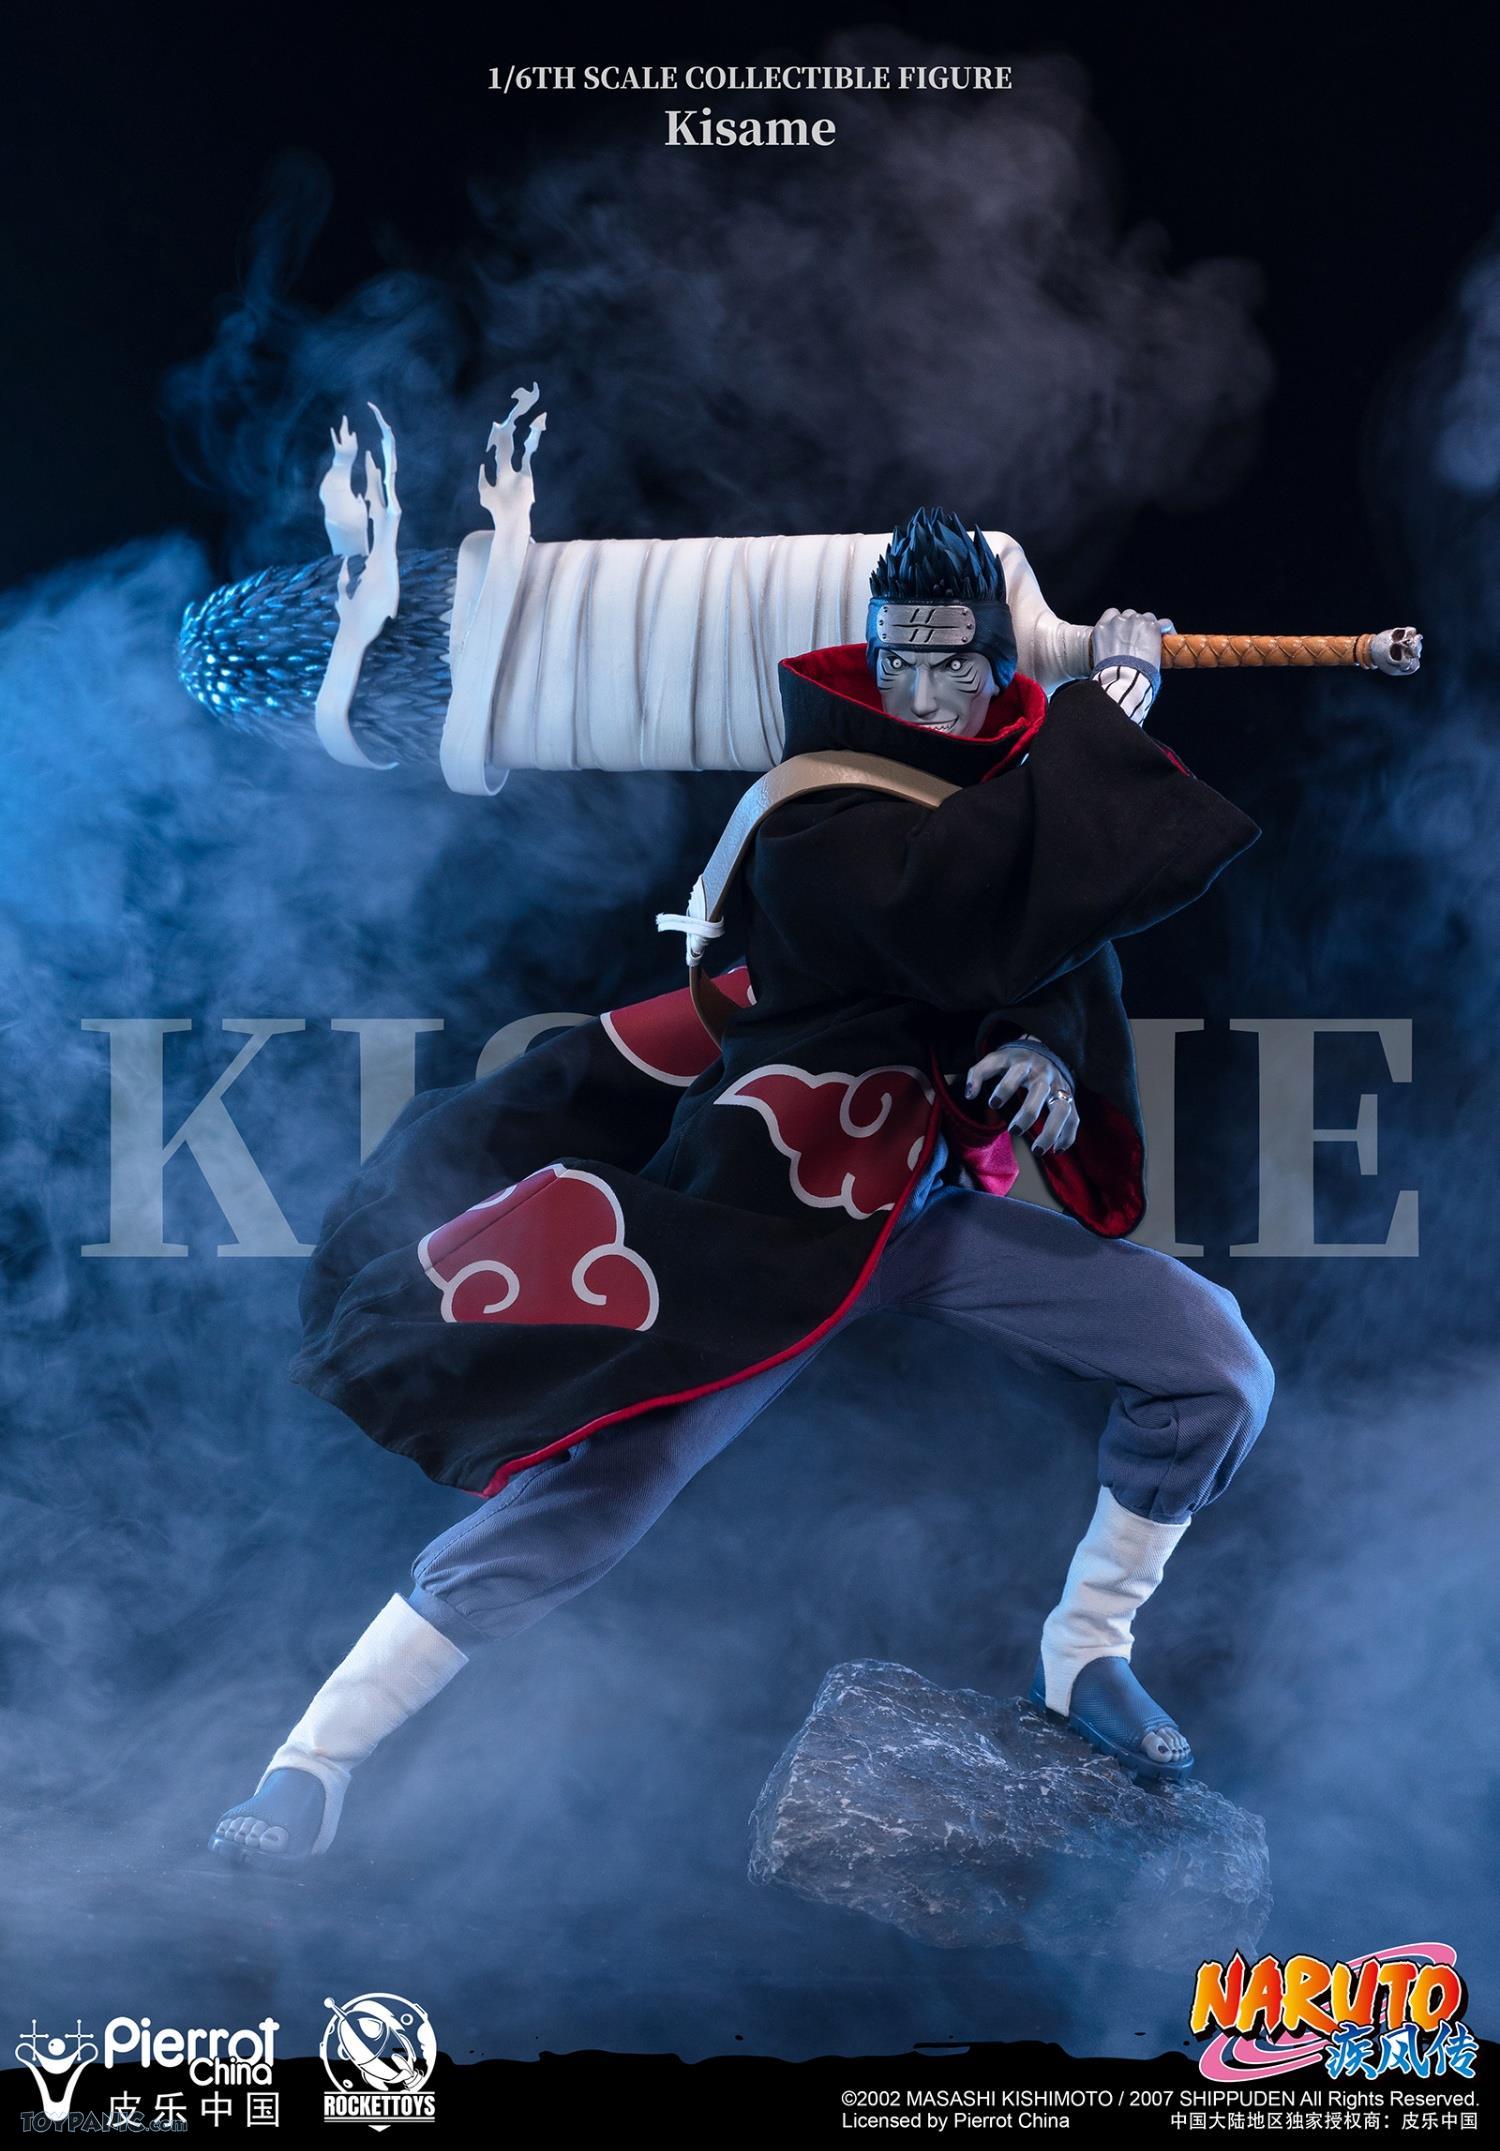 Male - NEW PRODUCT: Rocket Toys ROC-007 1/6 Scale Kisame 221202460434PM_6591732